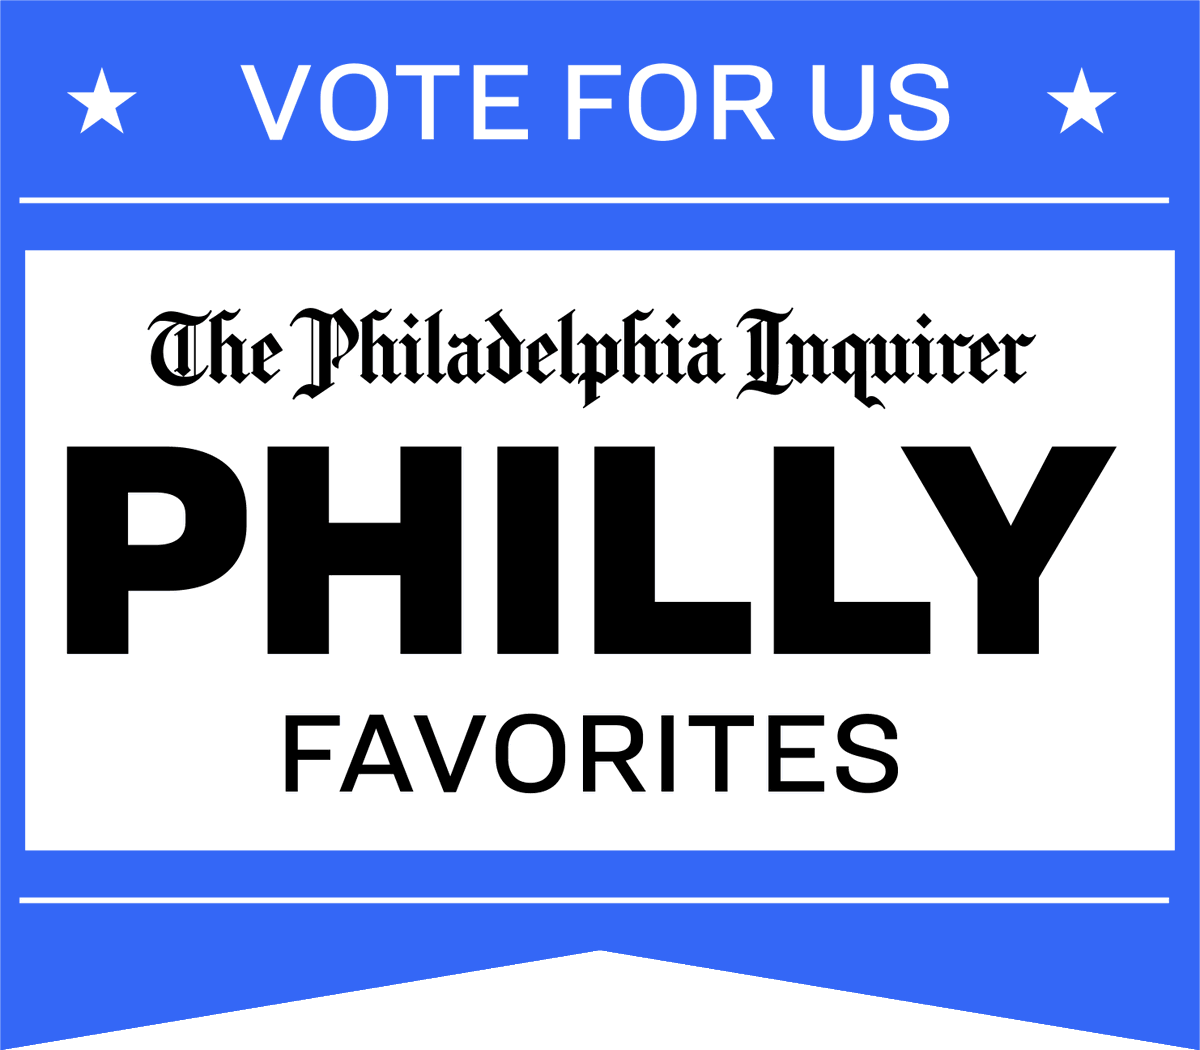 We're excited to be nominated for Best Museum and Best Attraction in @PhillyInquirer's Philly Favorites Contest! 🎉 You can vote once a day for the Museum through Jan. 19 by heading to the Things To Do category and finding us under Attraction and Museum: bit.ly/48hfXIP